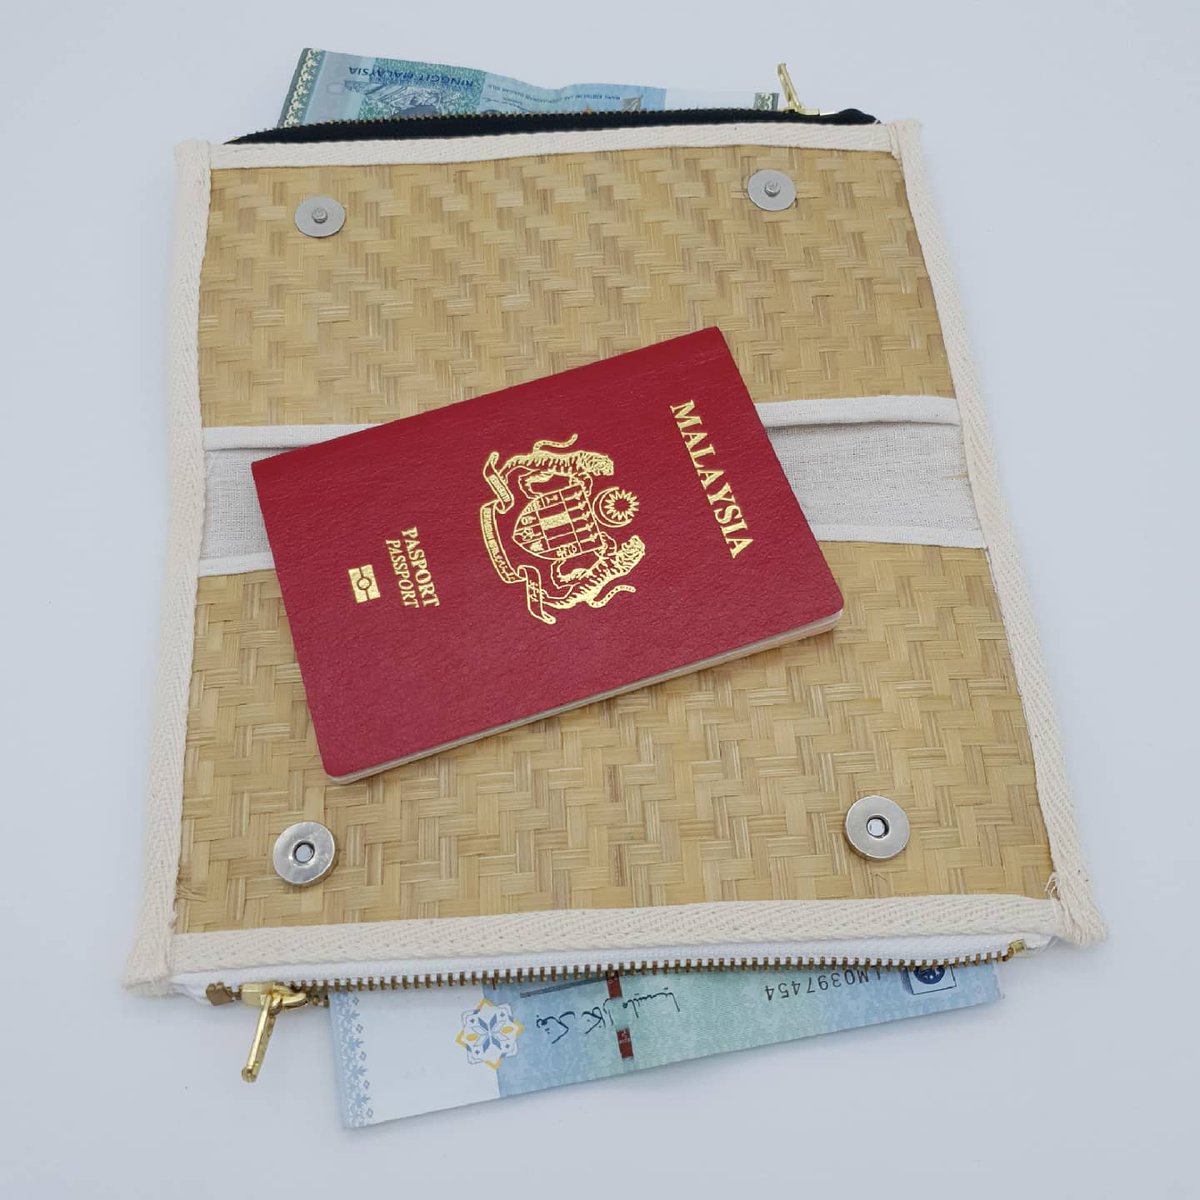 Can't wait 🛫? We too 😭... Stay safe all #passportholder #passportcover #naturalbamboo #sustainablematerials #ecofriendlyproducts🌿 #sustainableliving #handmade #handcrafted